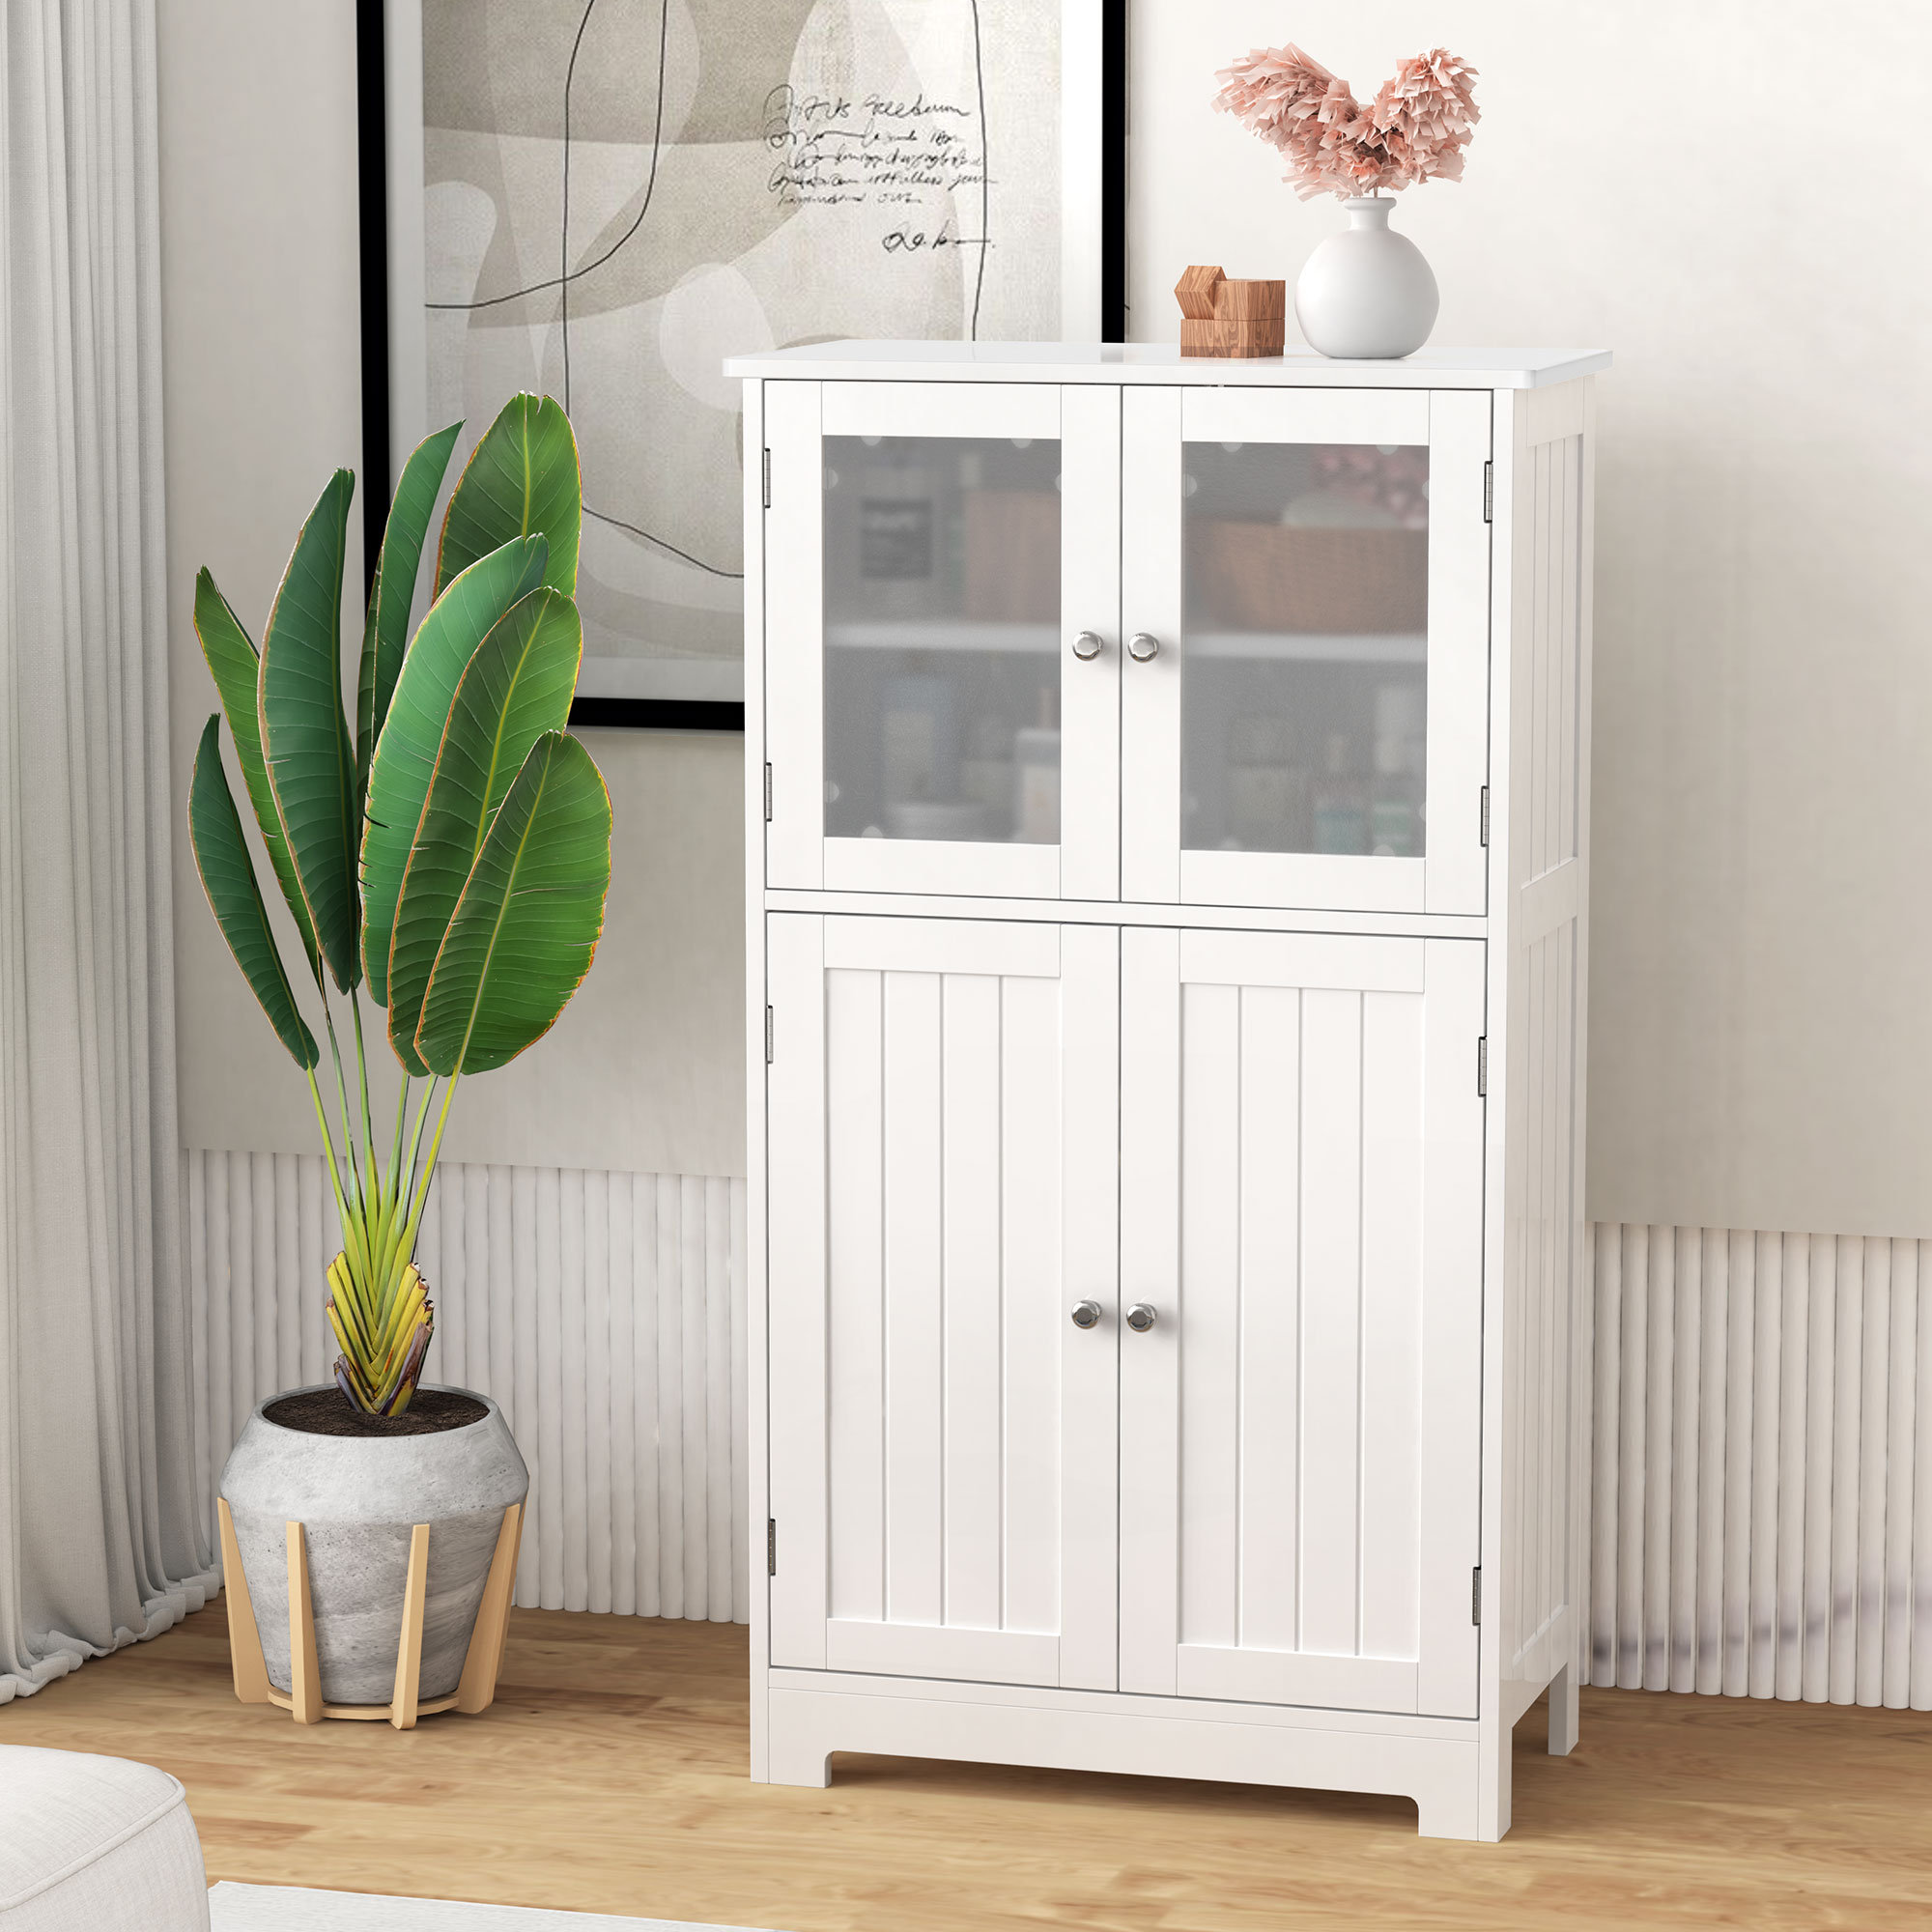 Clearance! Tall Bathroom Cabinet, Freestanding Storage Cabinet with Drawer  and Doors, MDF Board, Acrylic Door, Adjustable Shelf, White 